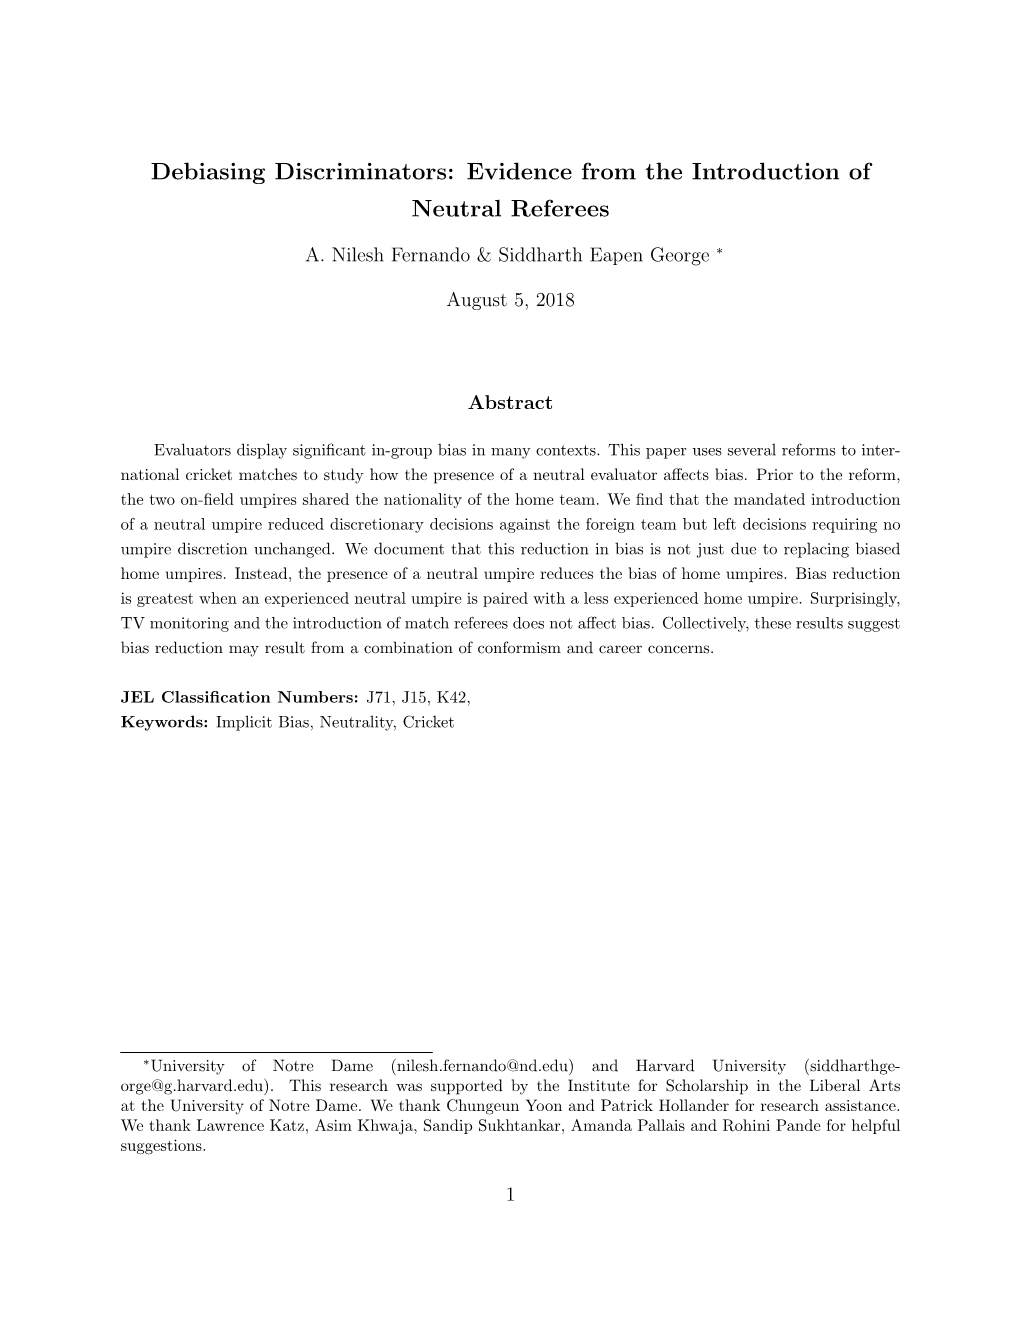 Debiasing Discriminators: Evidence from the Introduction of Neutral Referees